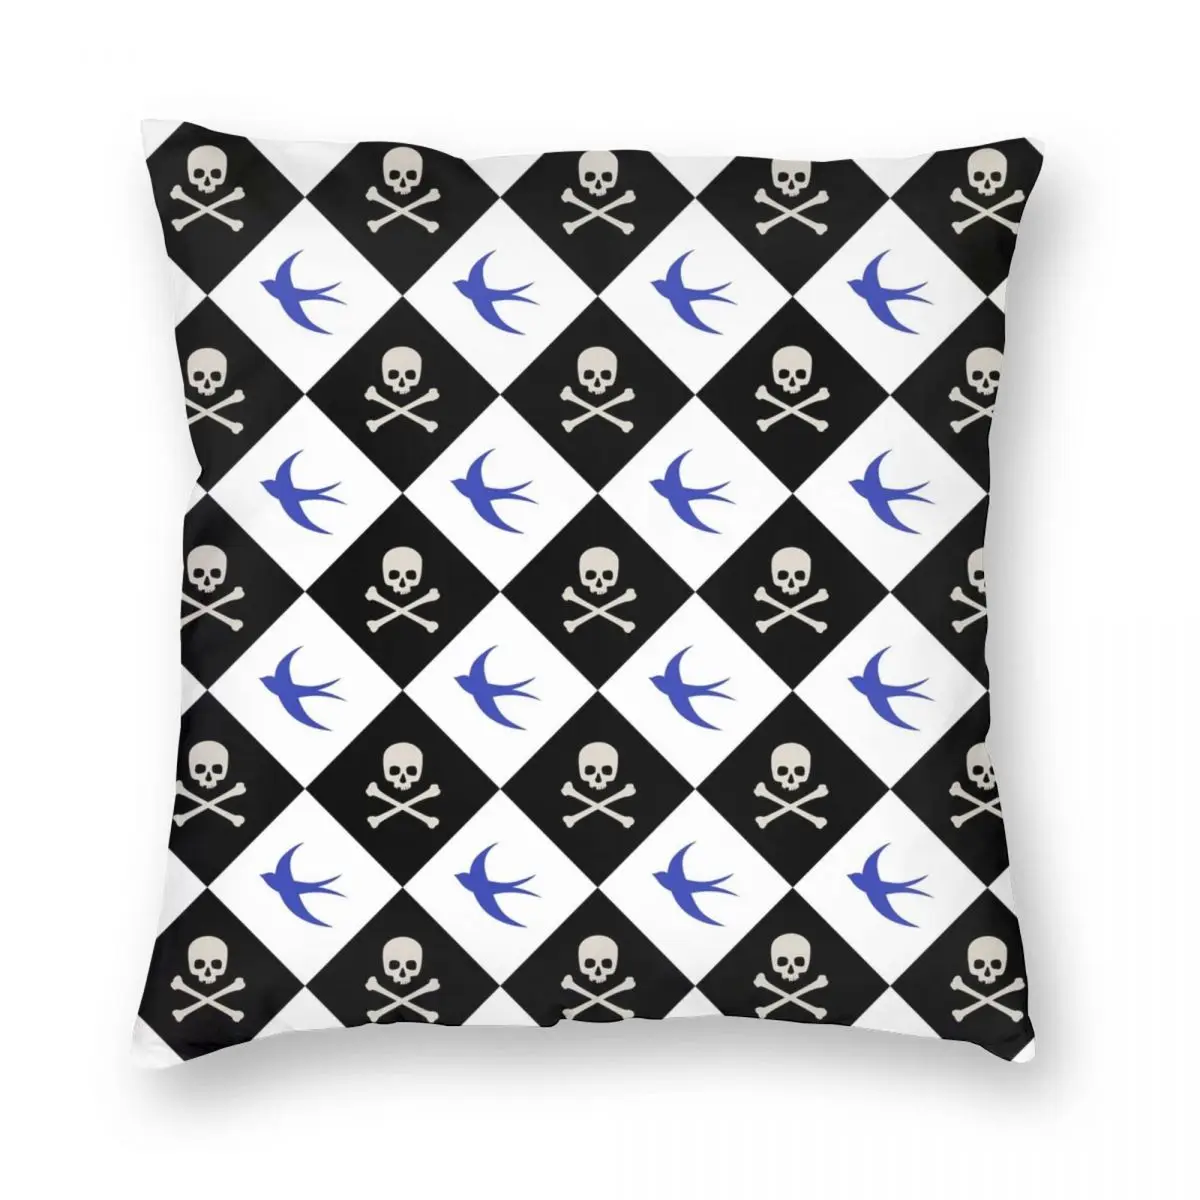 

Swallows Forever Skull Gothic Art Pillowcase Printing Polyester Cushion Cover Decorations Throw Pillow Case Cover 45X45cm